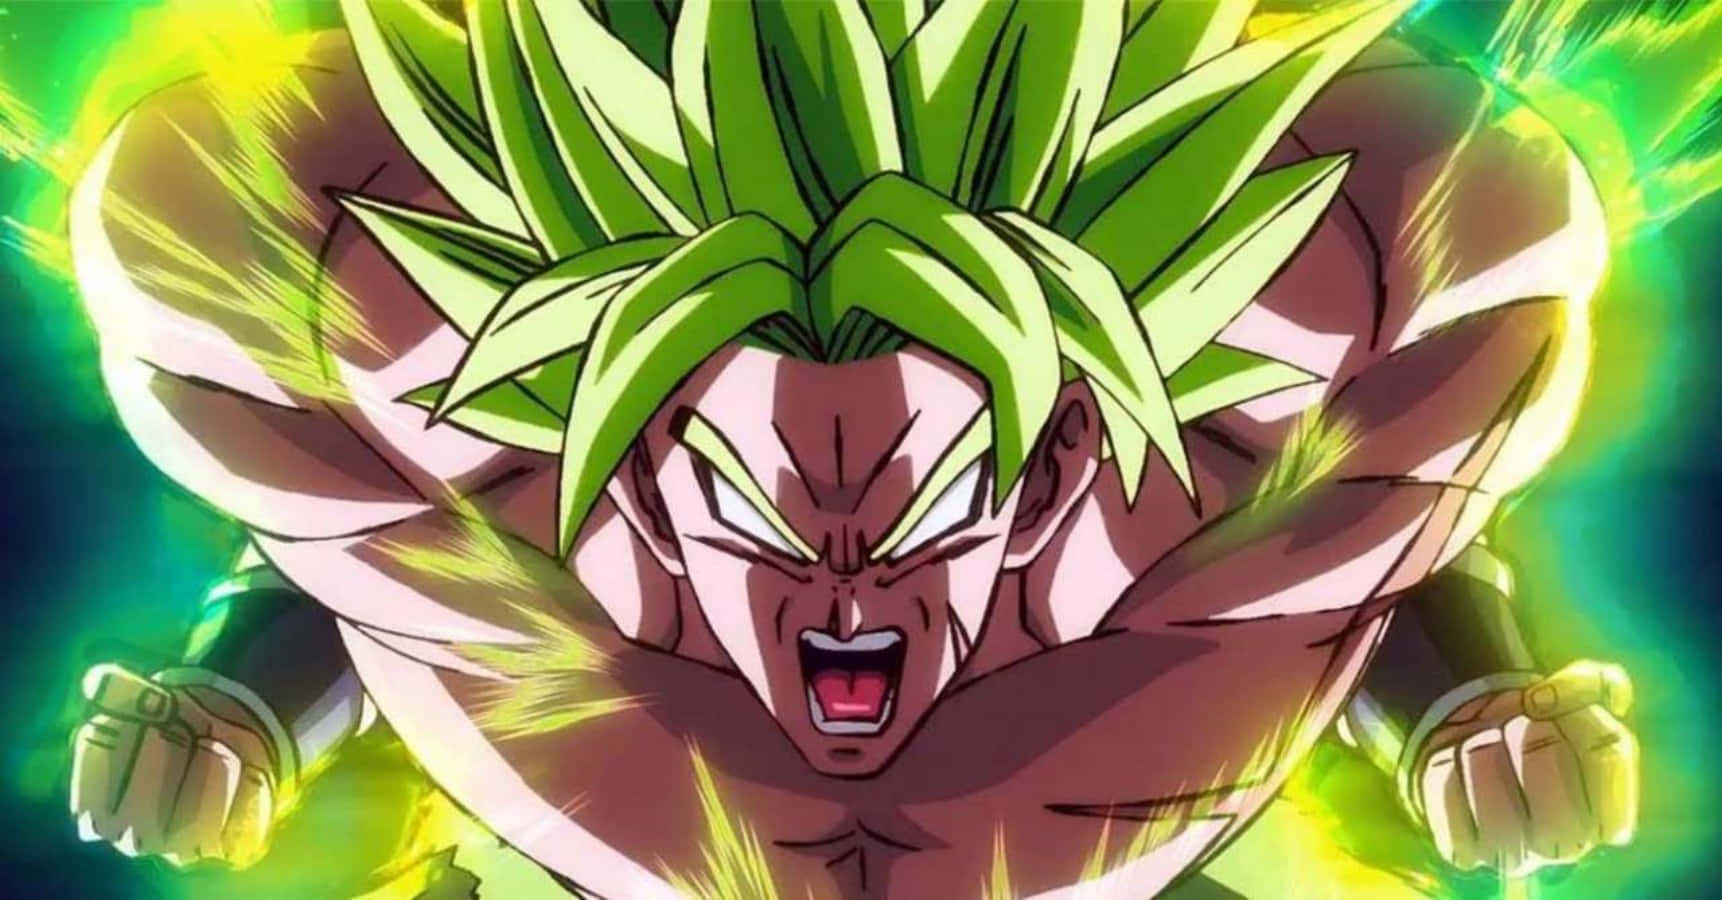 Goku, Vegeta and Broly join forces in the thrilling new movie 'Dragon Ball Super: Broly'.